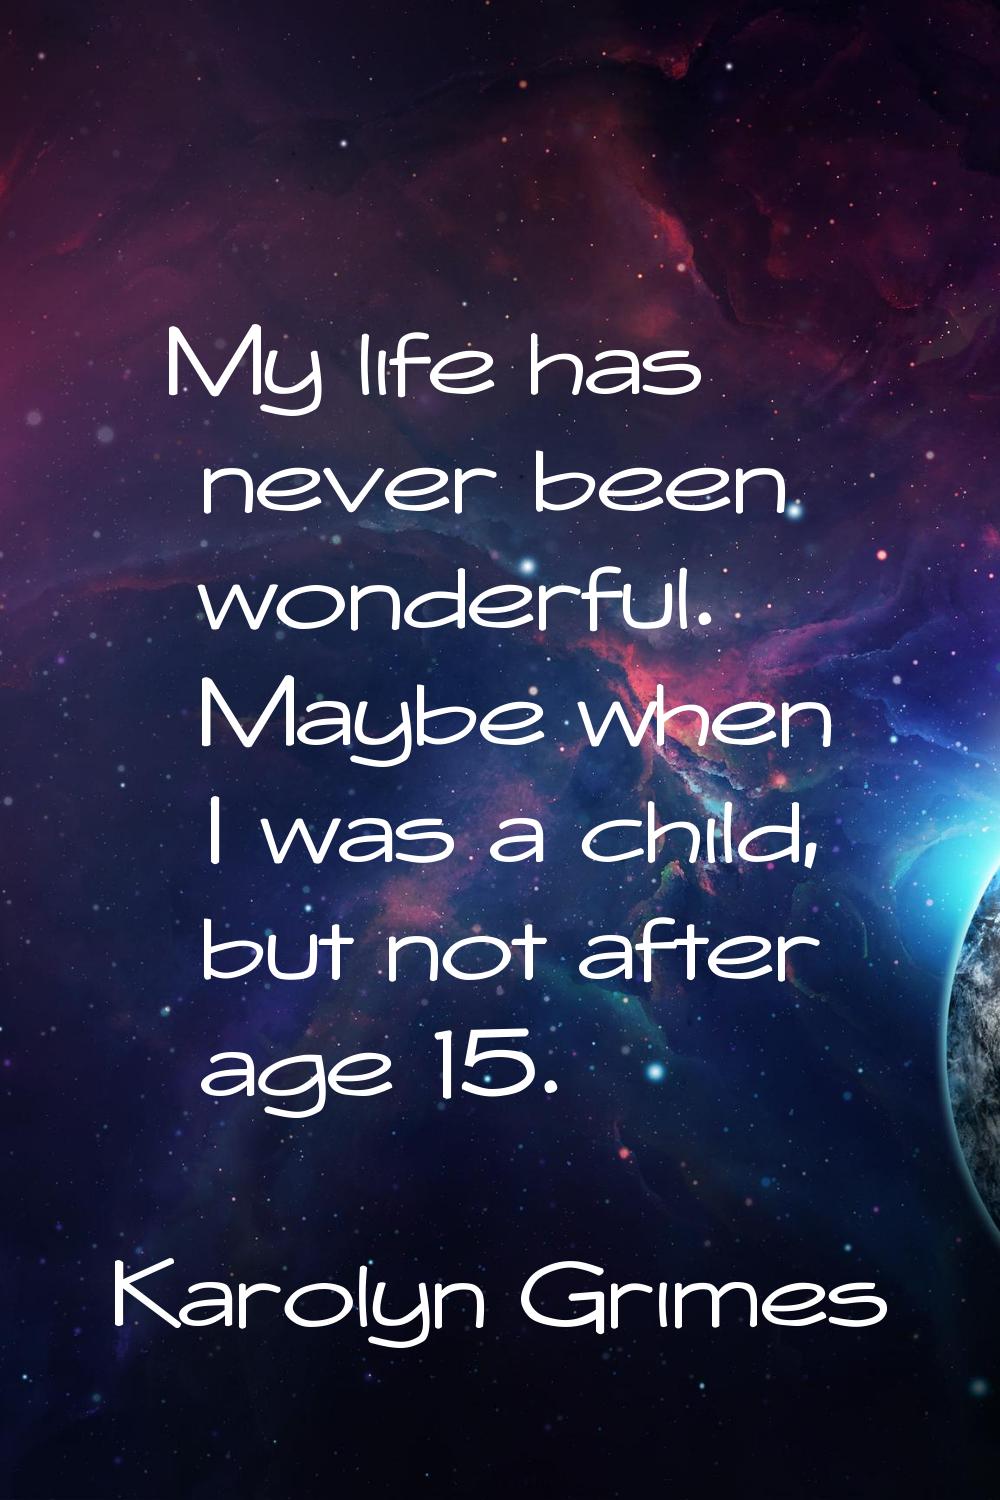 My life has never been wonderful. Maybe when I was a child, but not after age 15.